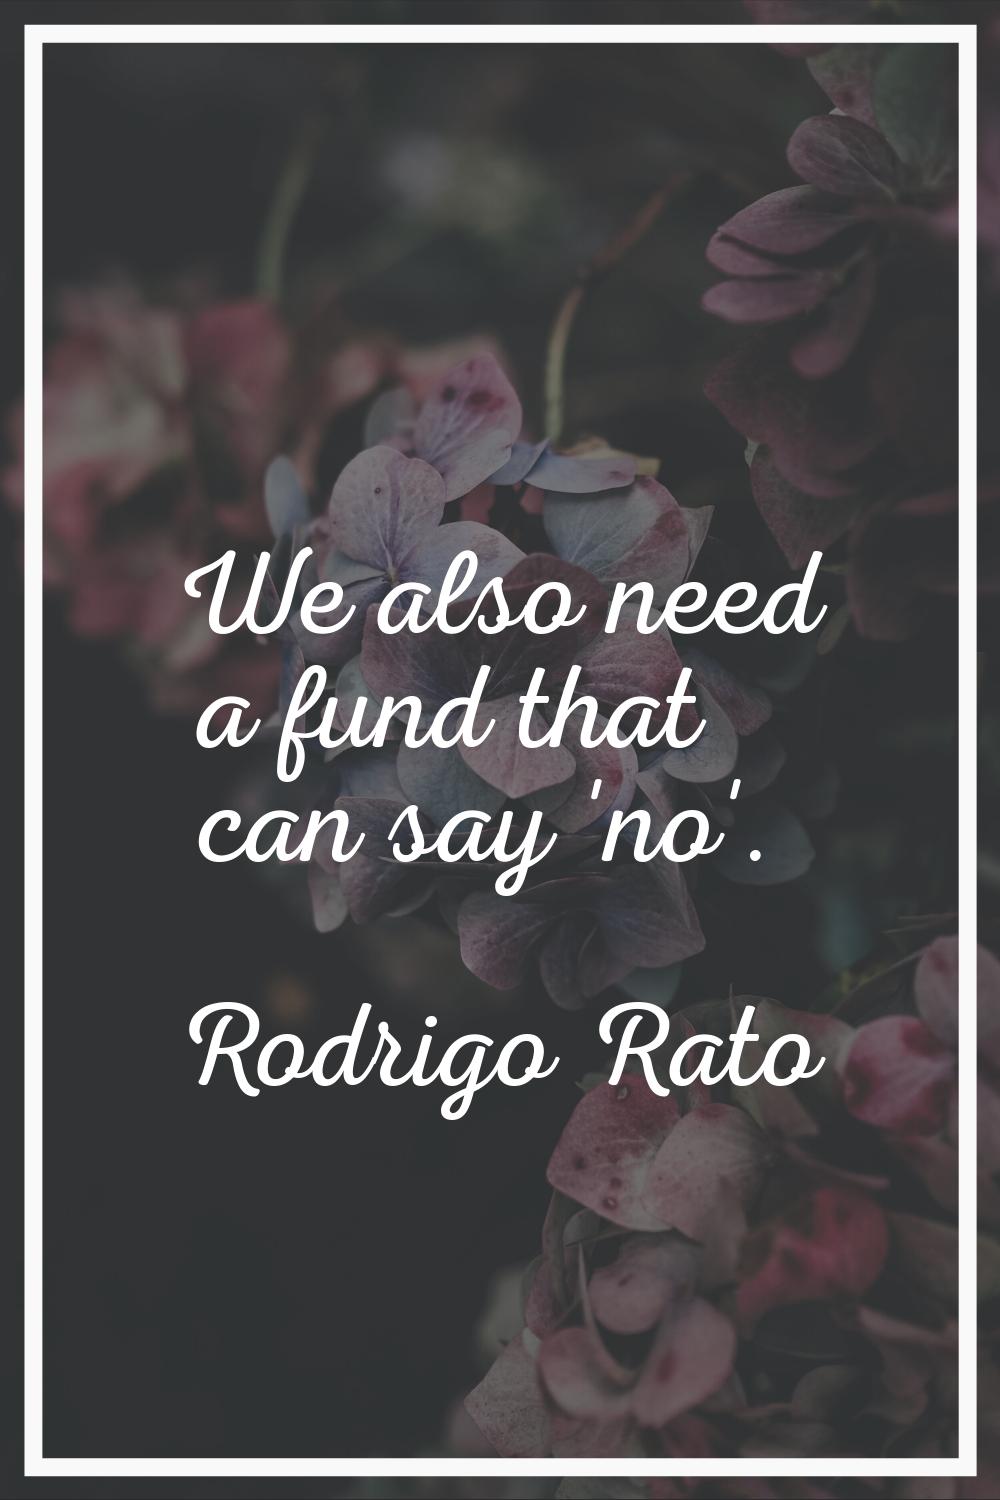 We also need a fund that can say 'no'.